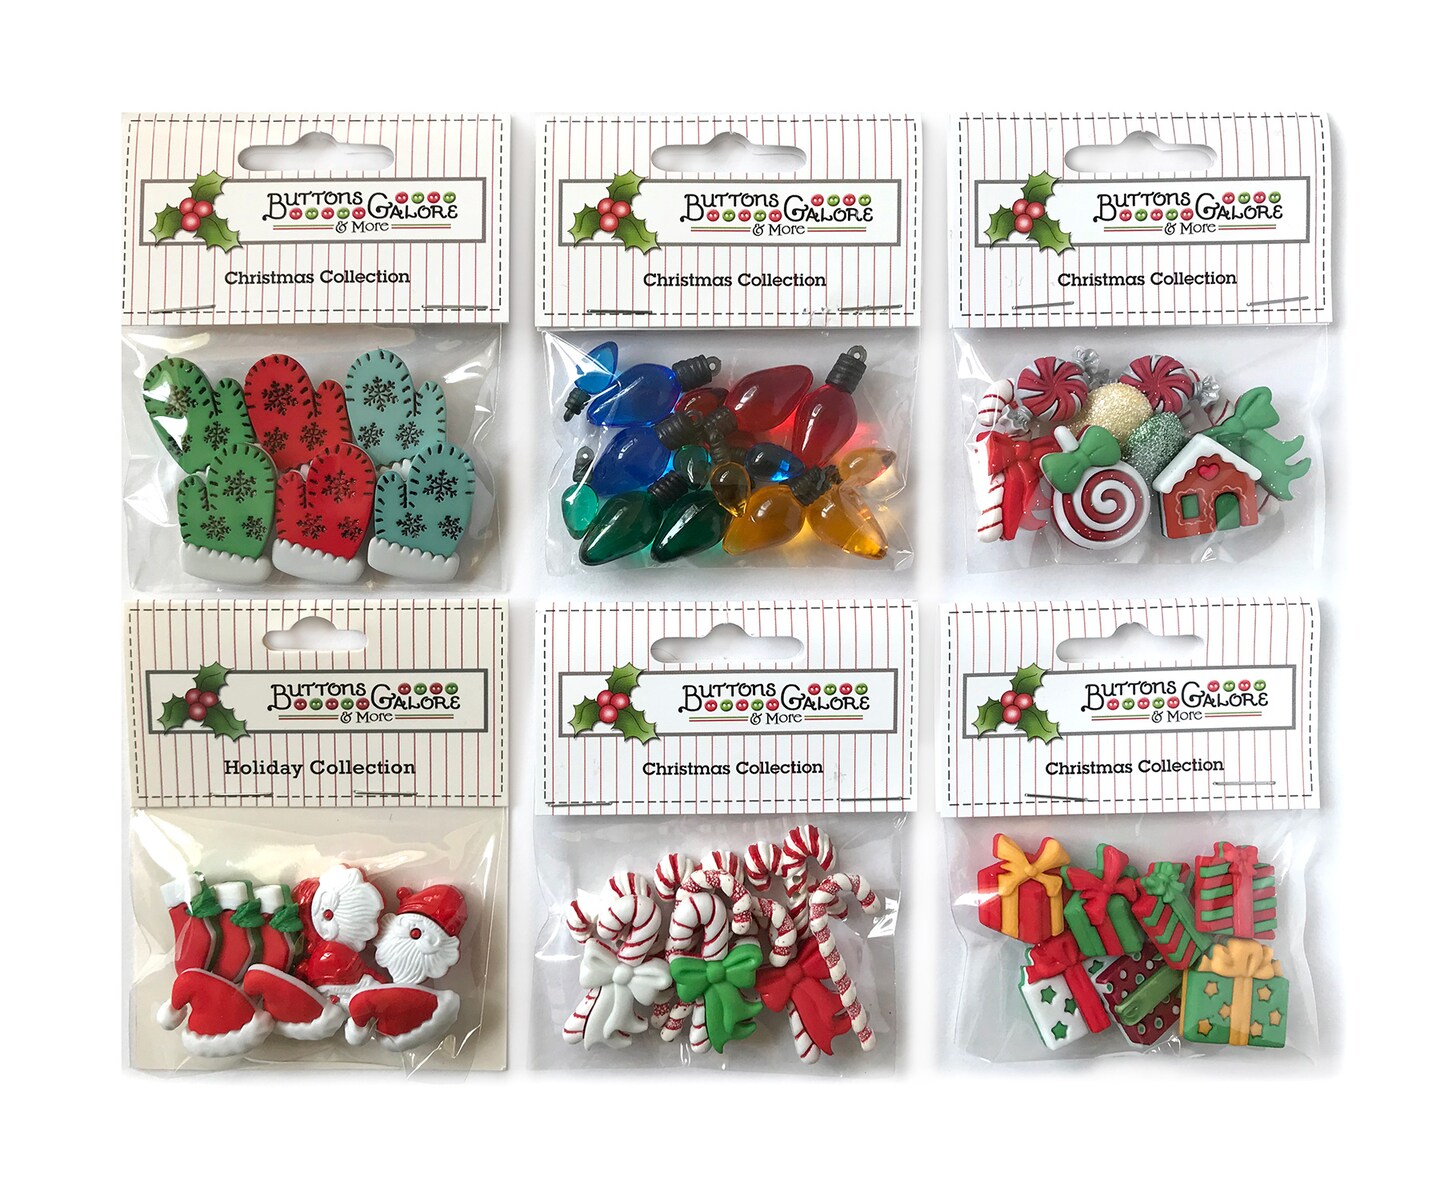 Buttons Galore 50+ Assorted Christmas Buttons for Sewing &#x26; Crafts - Set of 6 Button Packs - Candy Canes, Santa, Lights &#x26; More